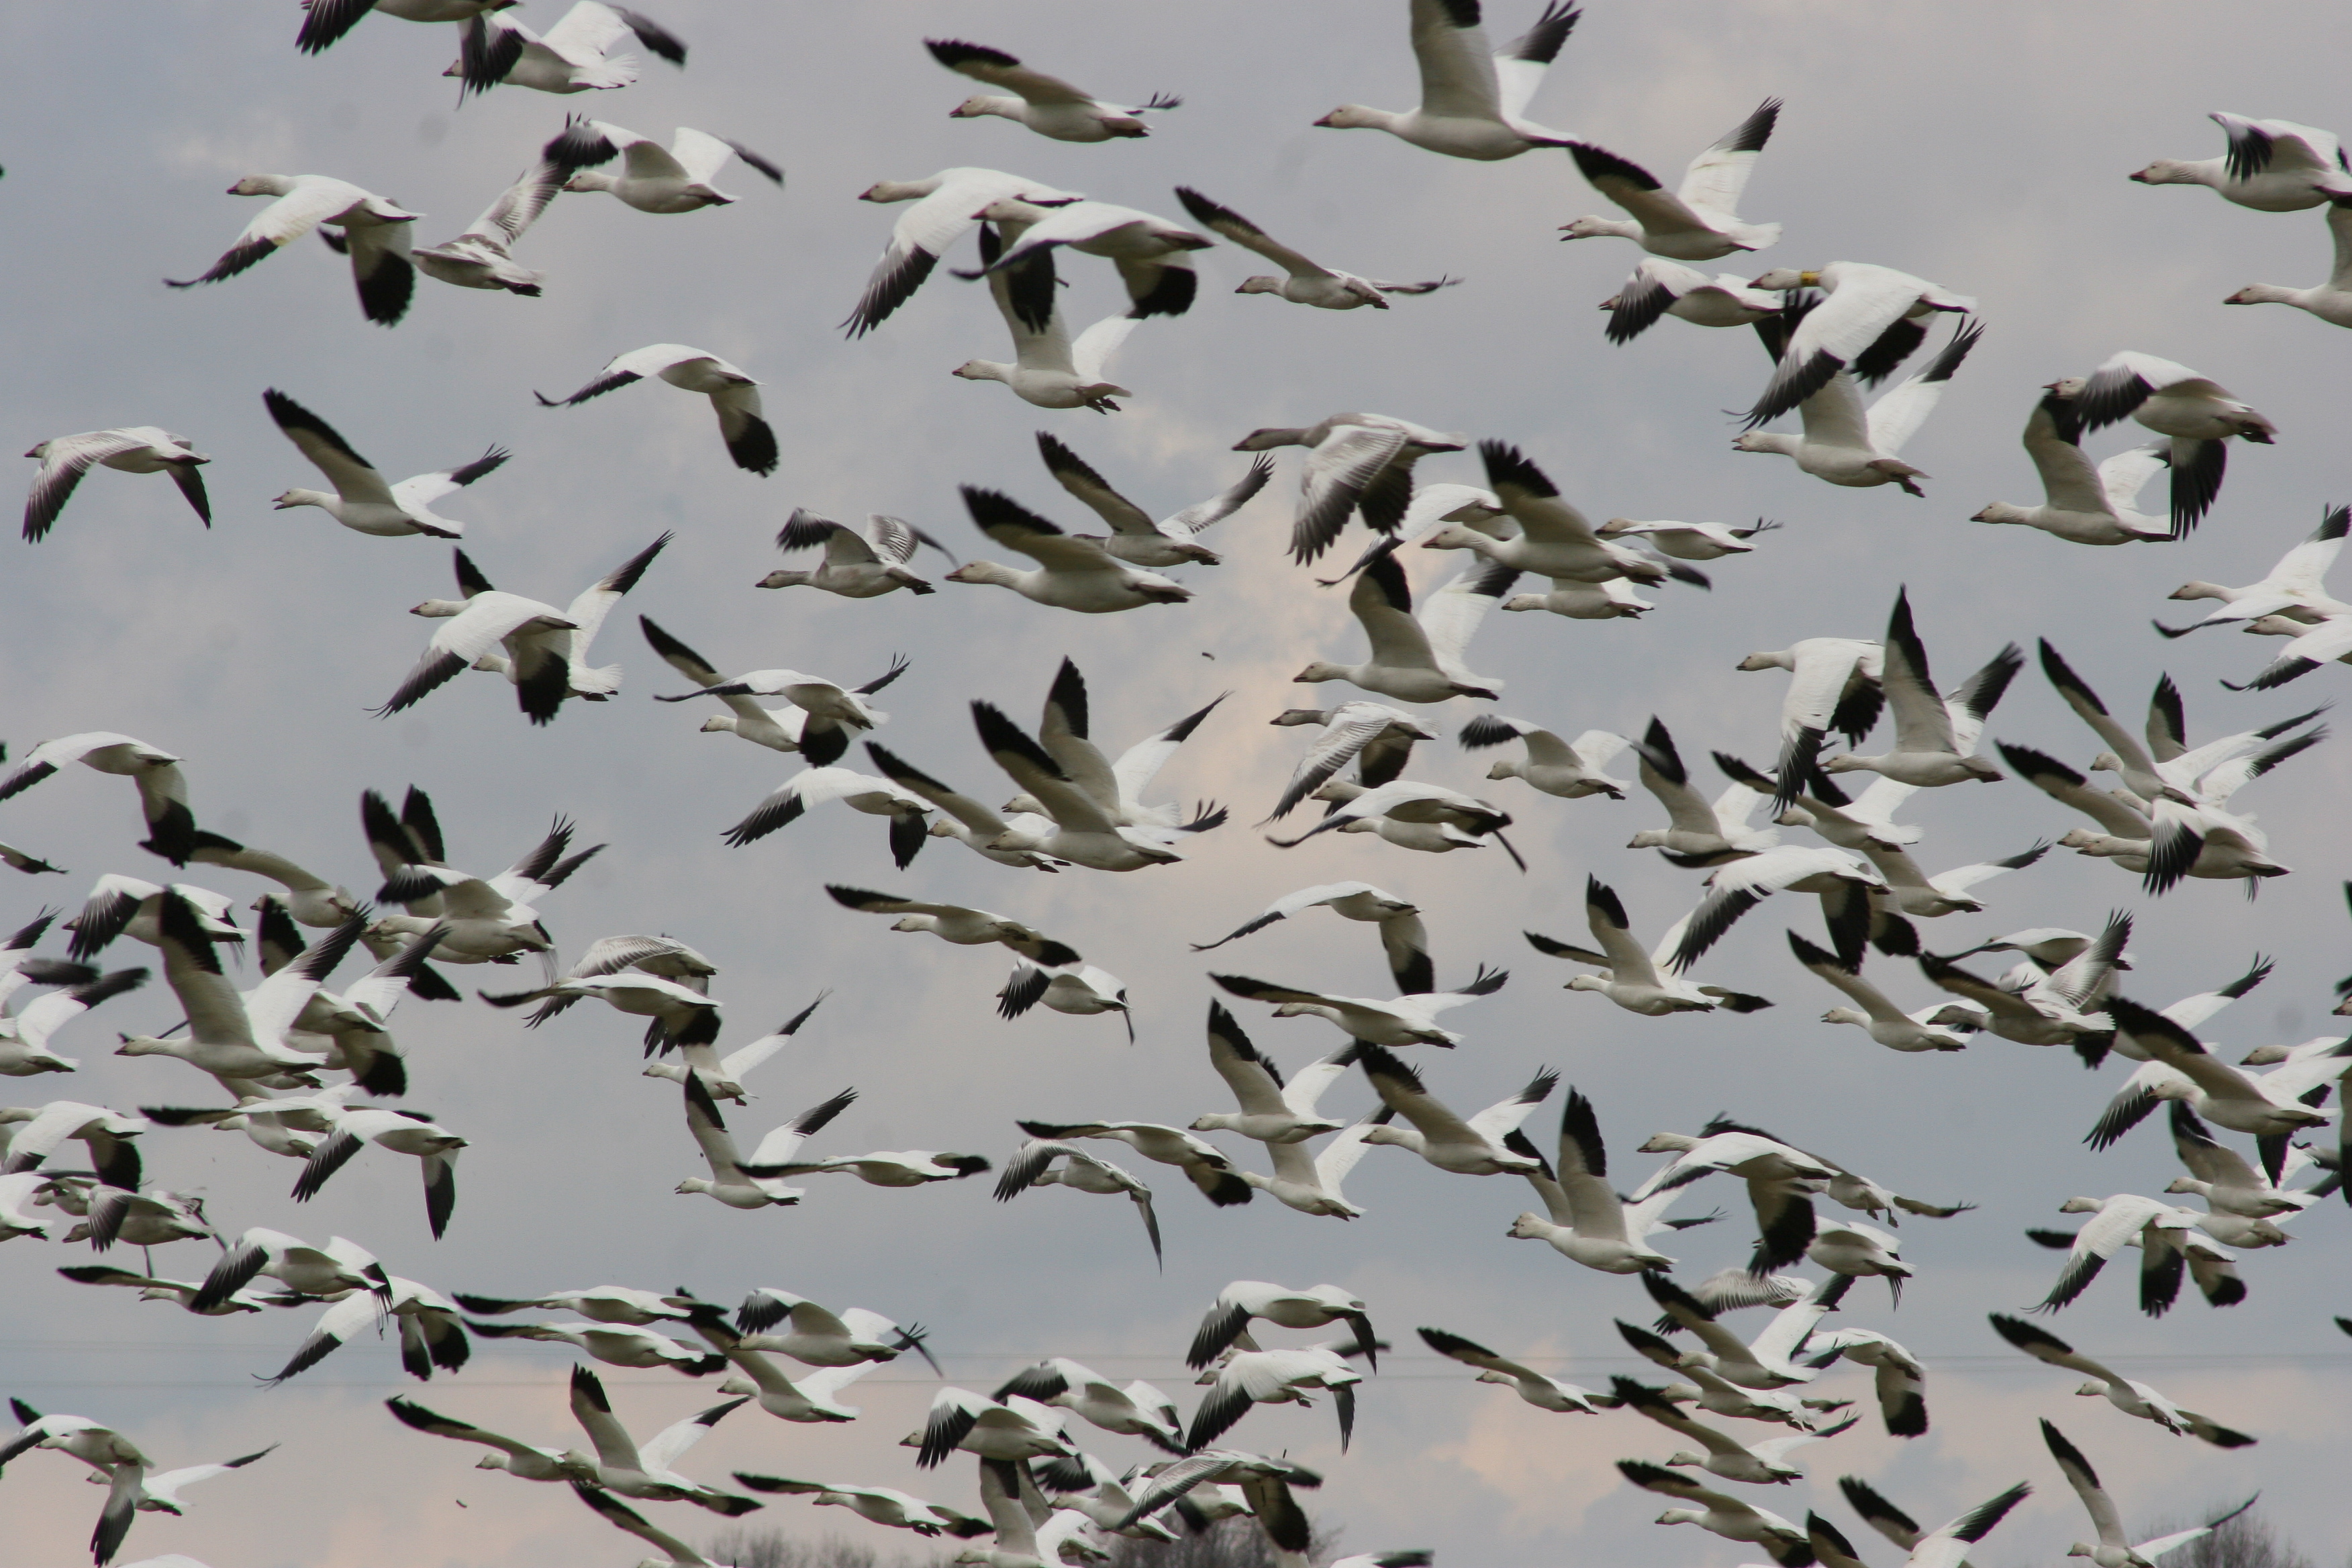 Snow Geese at Forsythe